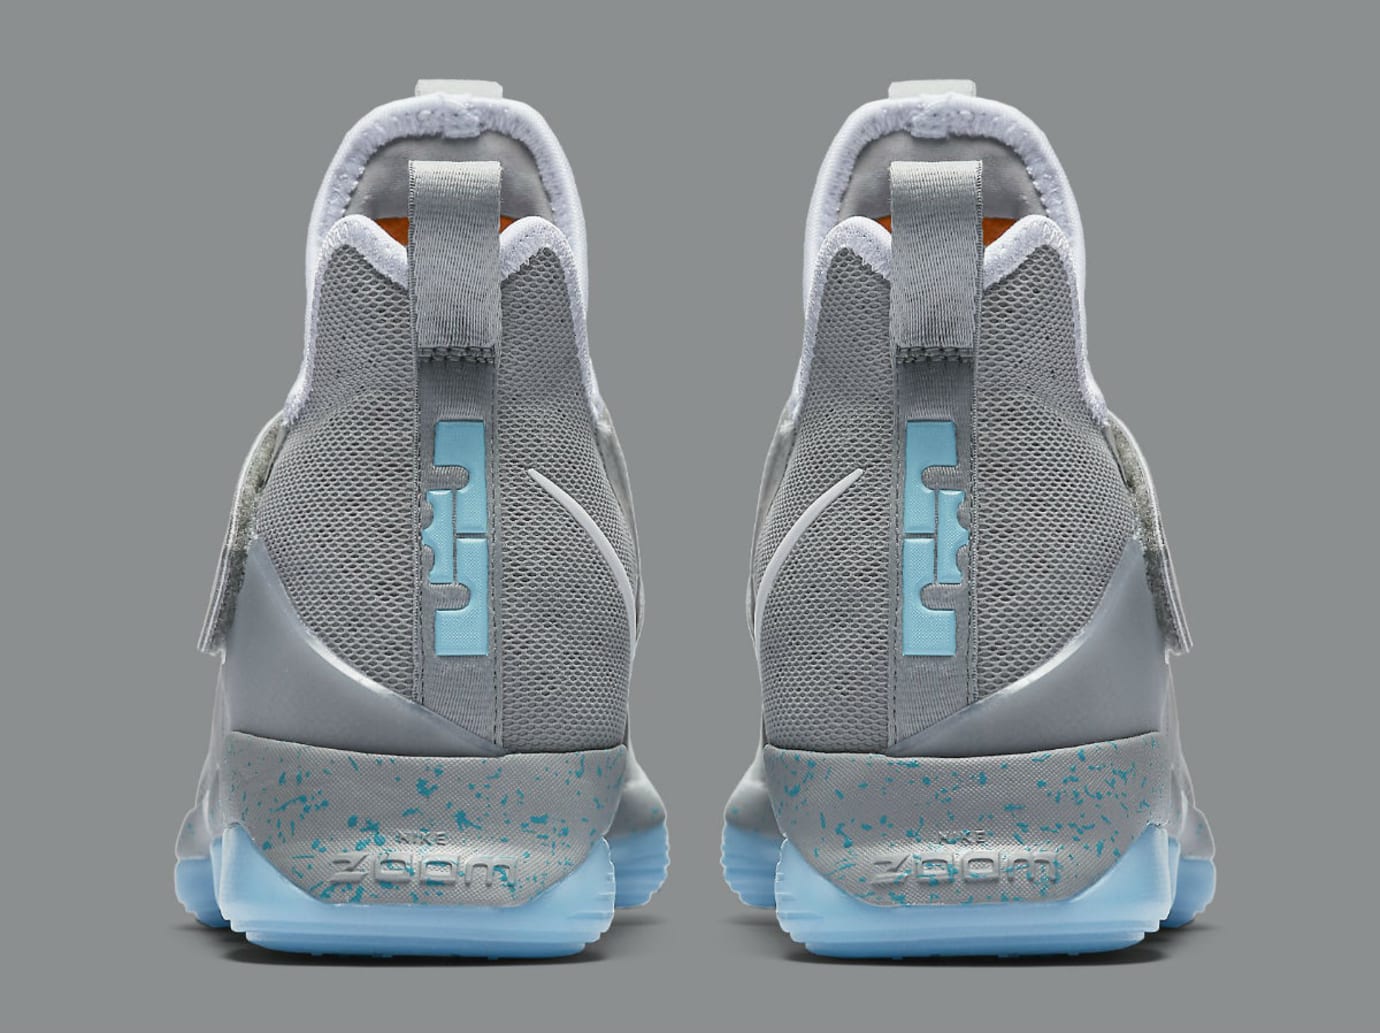 Nike Lebron 14 Mag Mcfly Release Date 852405-005 | Sole Collector